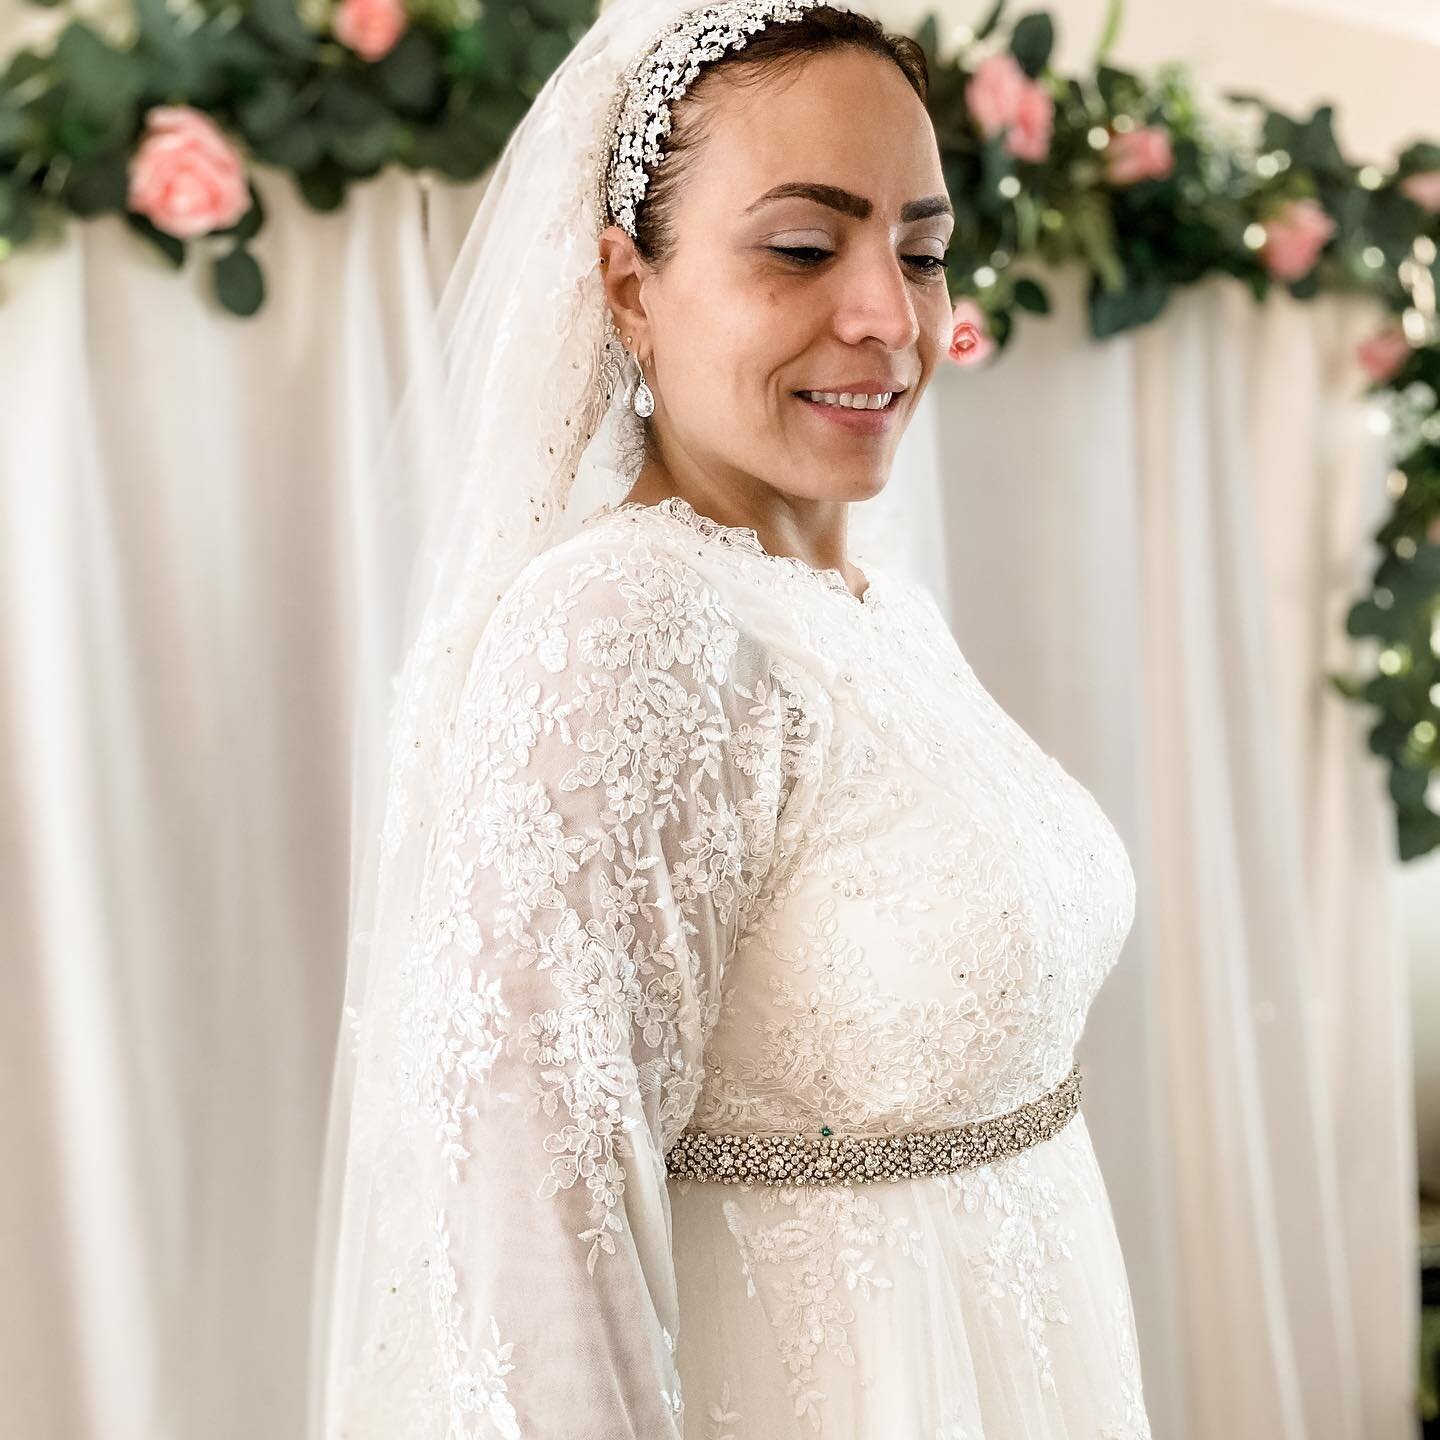 This one truly has my heart&hellip;&hearts;️
.
💎 2 Zoom calls
💎 4 fittings 
💎 200+ sewing hours 
💎 3,000 hand-placed gems 
💎 1 beautiful bride 👰🏻&zwj;♀️ 
.
So many congratulations go out to you Marisol! Creating you gown was a labor of love! ?